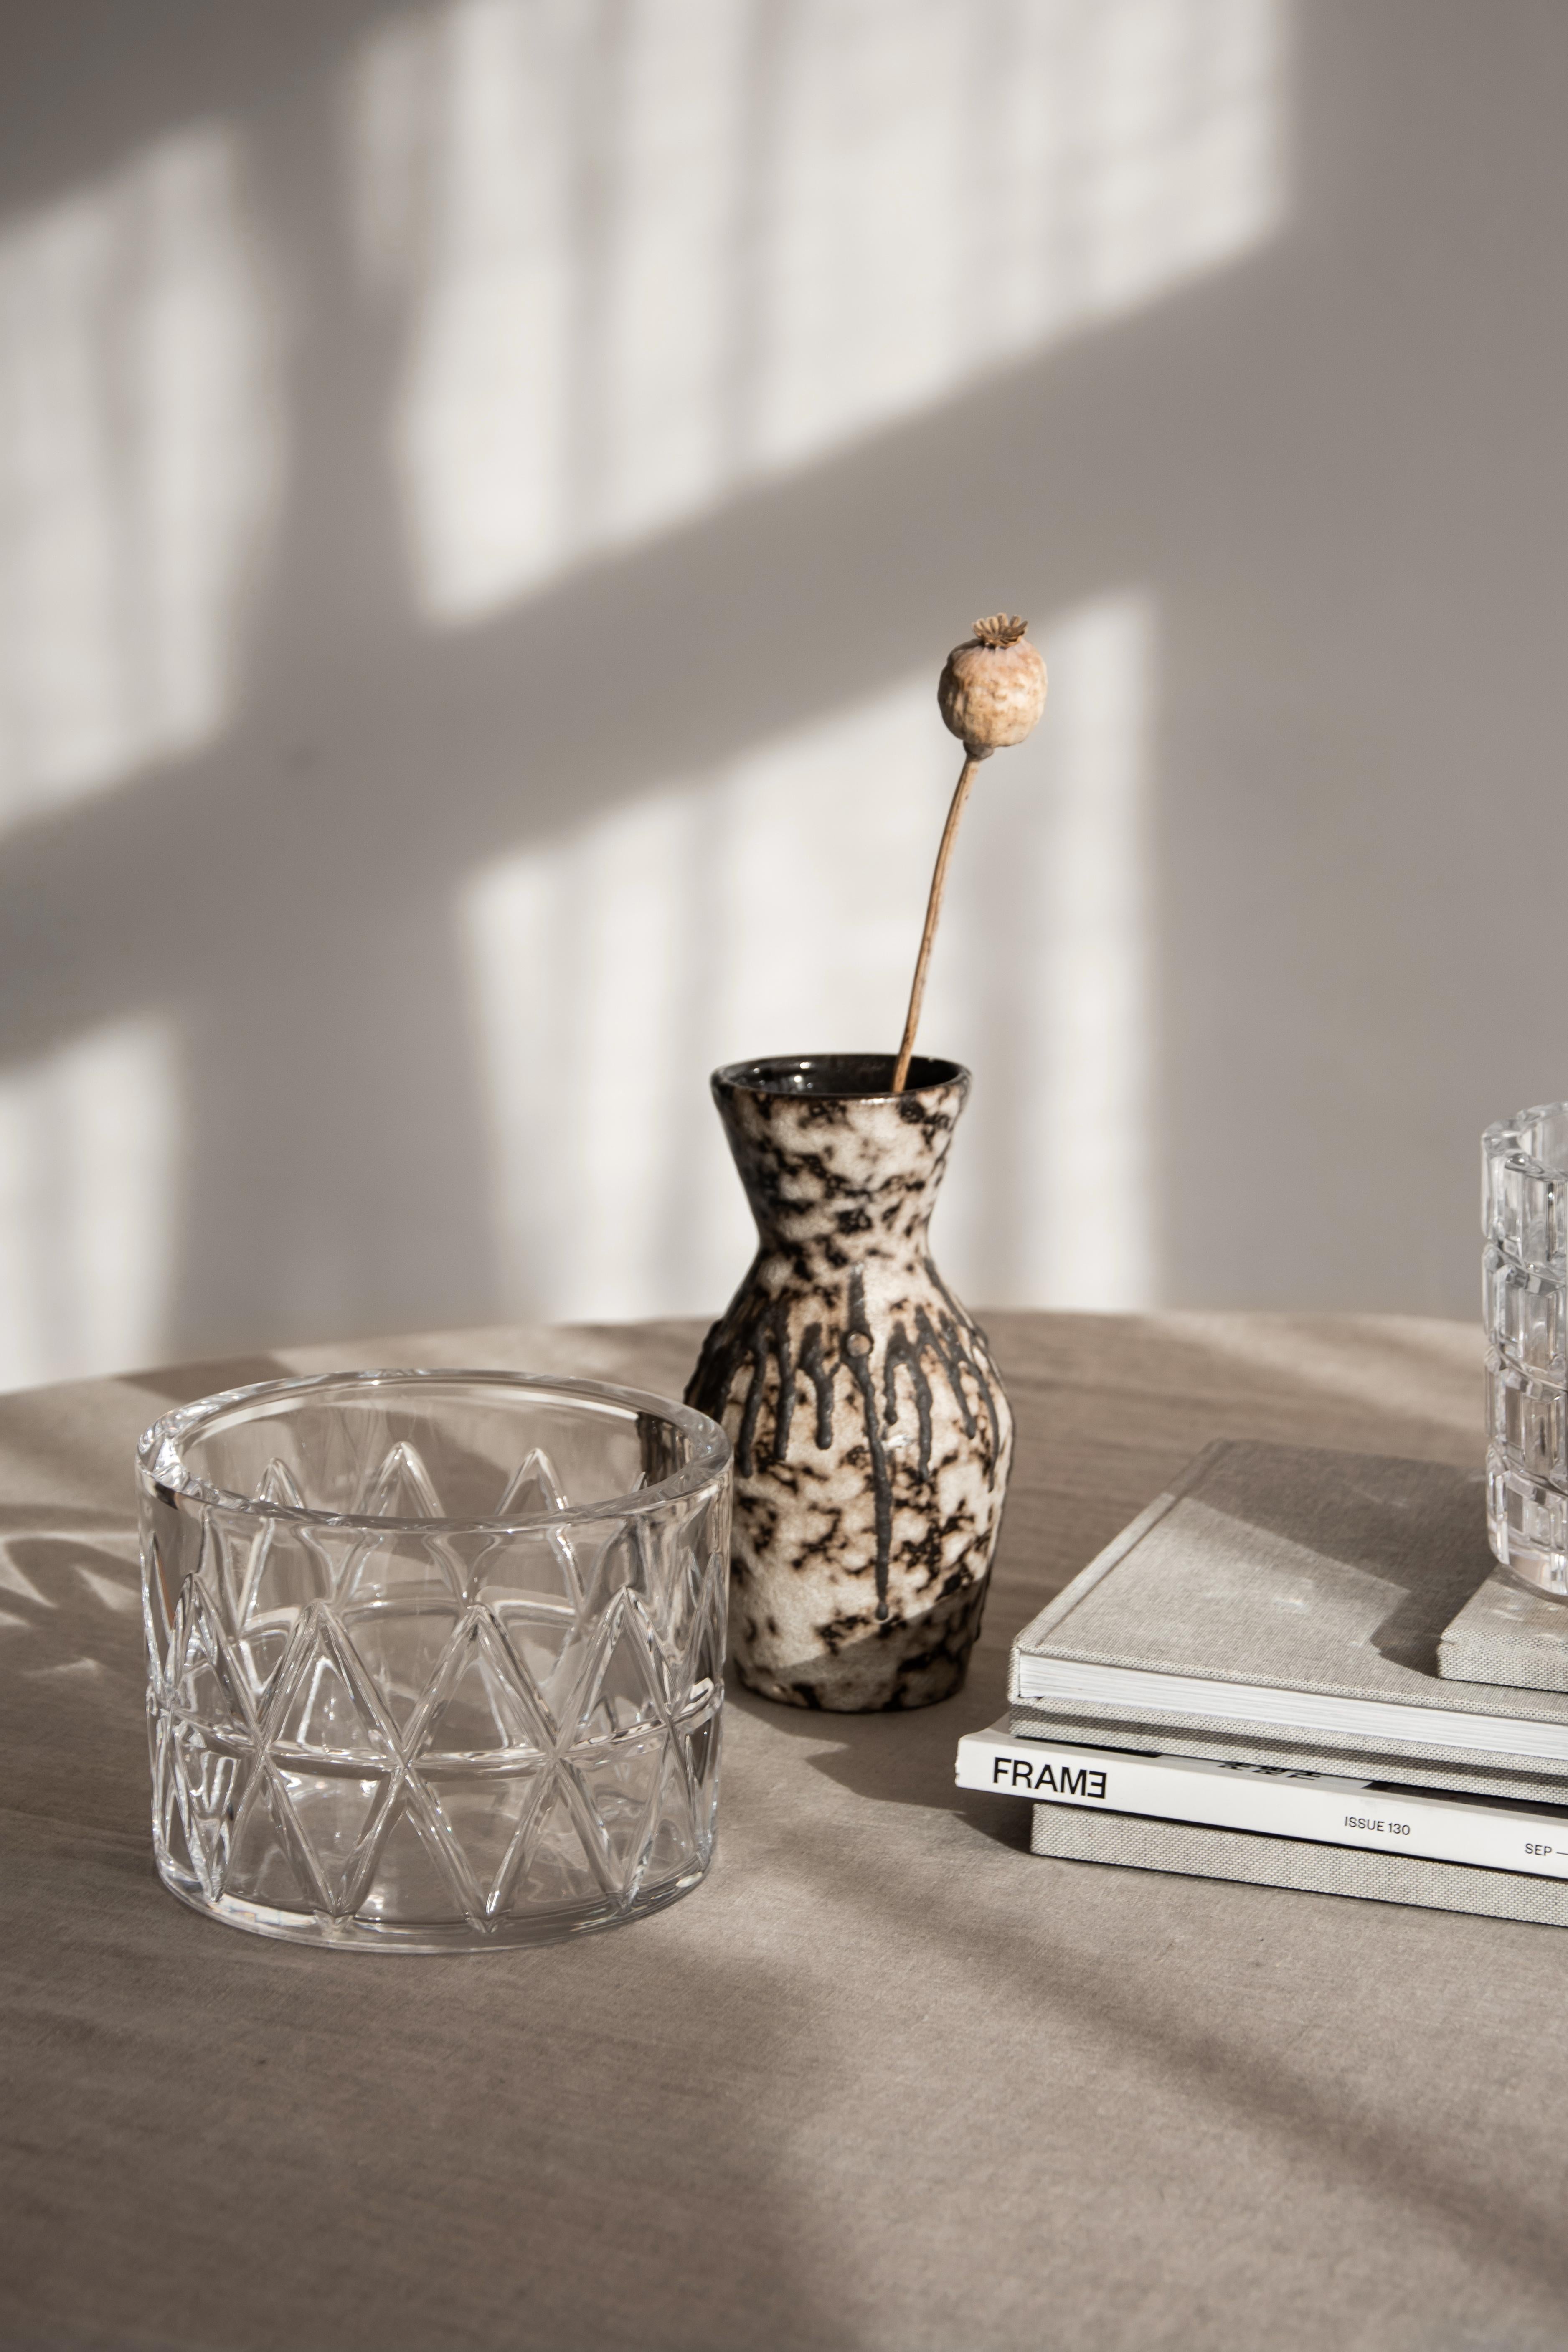 Peak Bowl from Orrefors is made of thick, clear crystal with a motif inspired by the majestic mountain peaks from the northern regions of Scandinavia. The bowl is decorative as well as functional. Designed by Martti Rytkönen.
